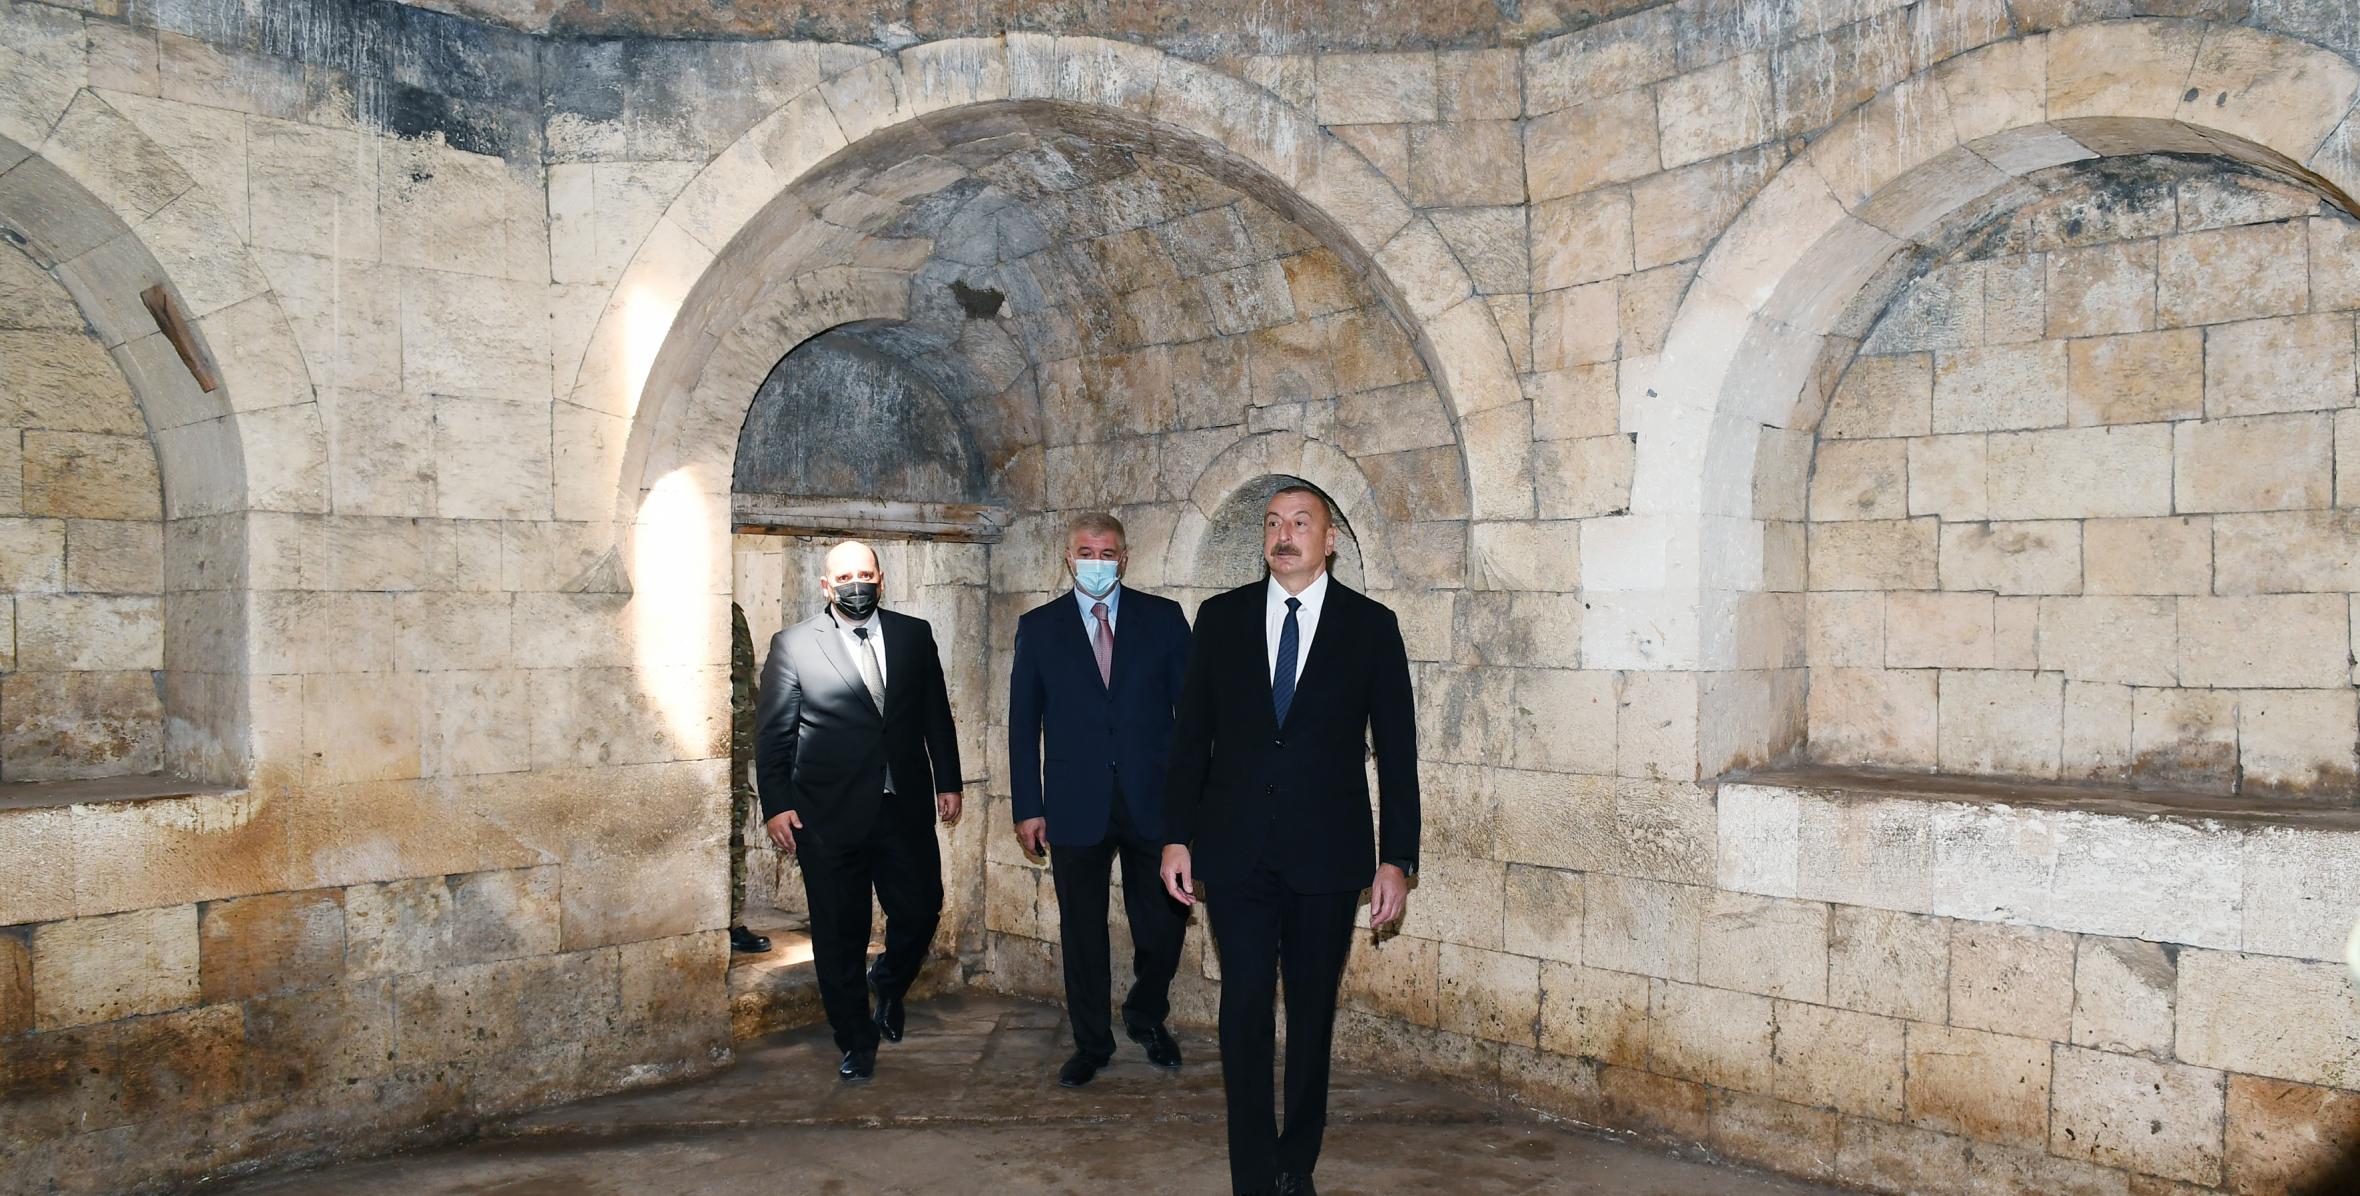 Ilham Aliyev visited palace complex where Panahali khan’s Palace located